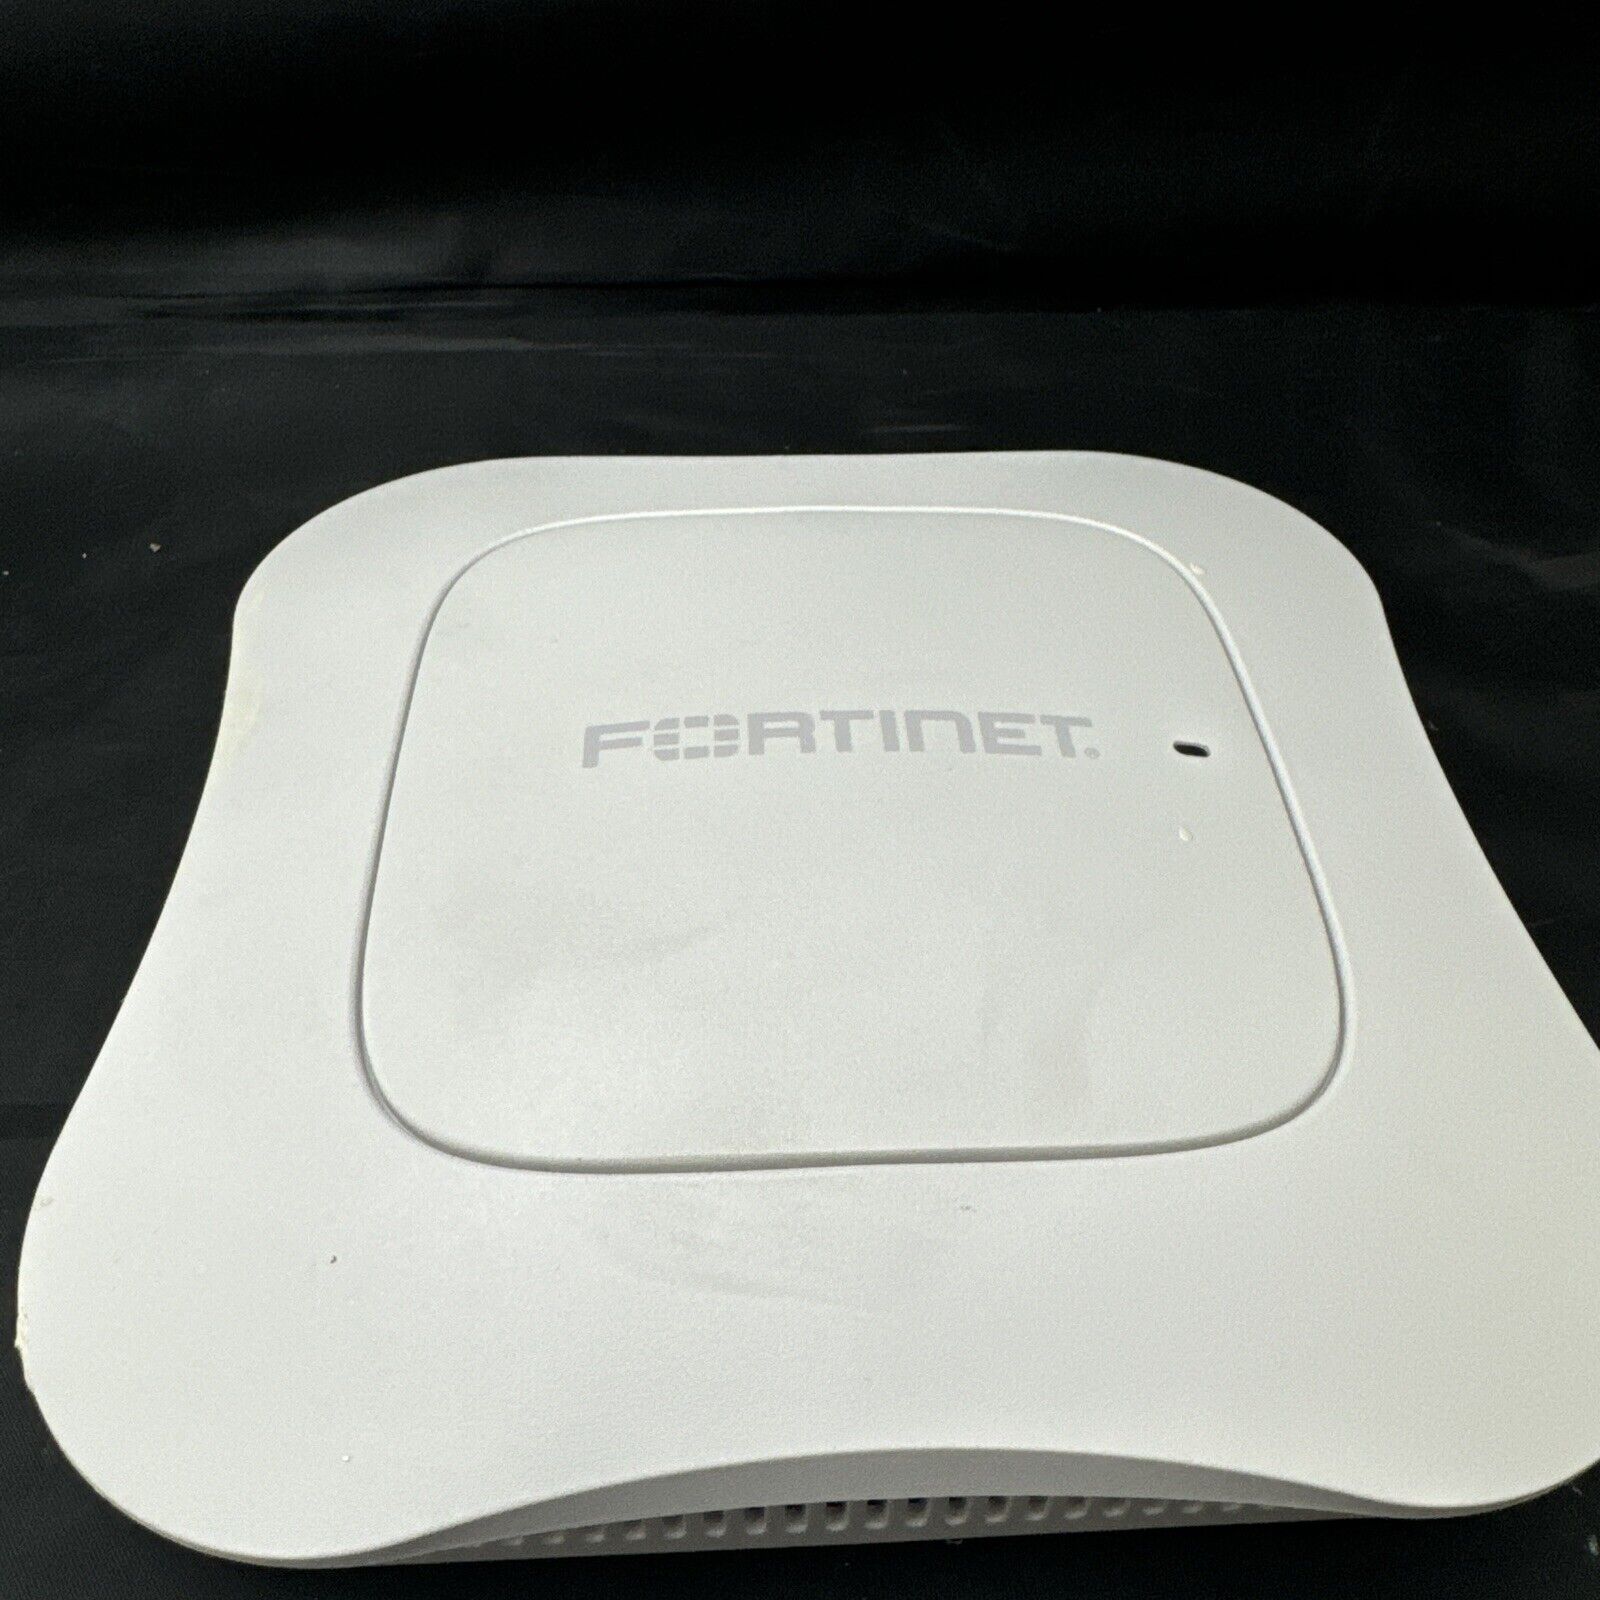 Fortinet Meru AP822i V2 wireless access point 1167 Mbit/s Dual Band POE